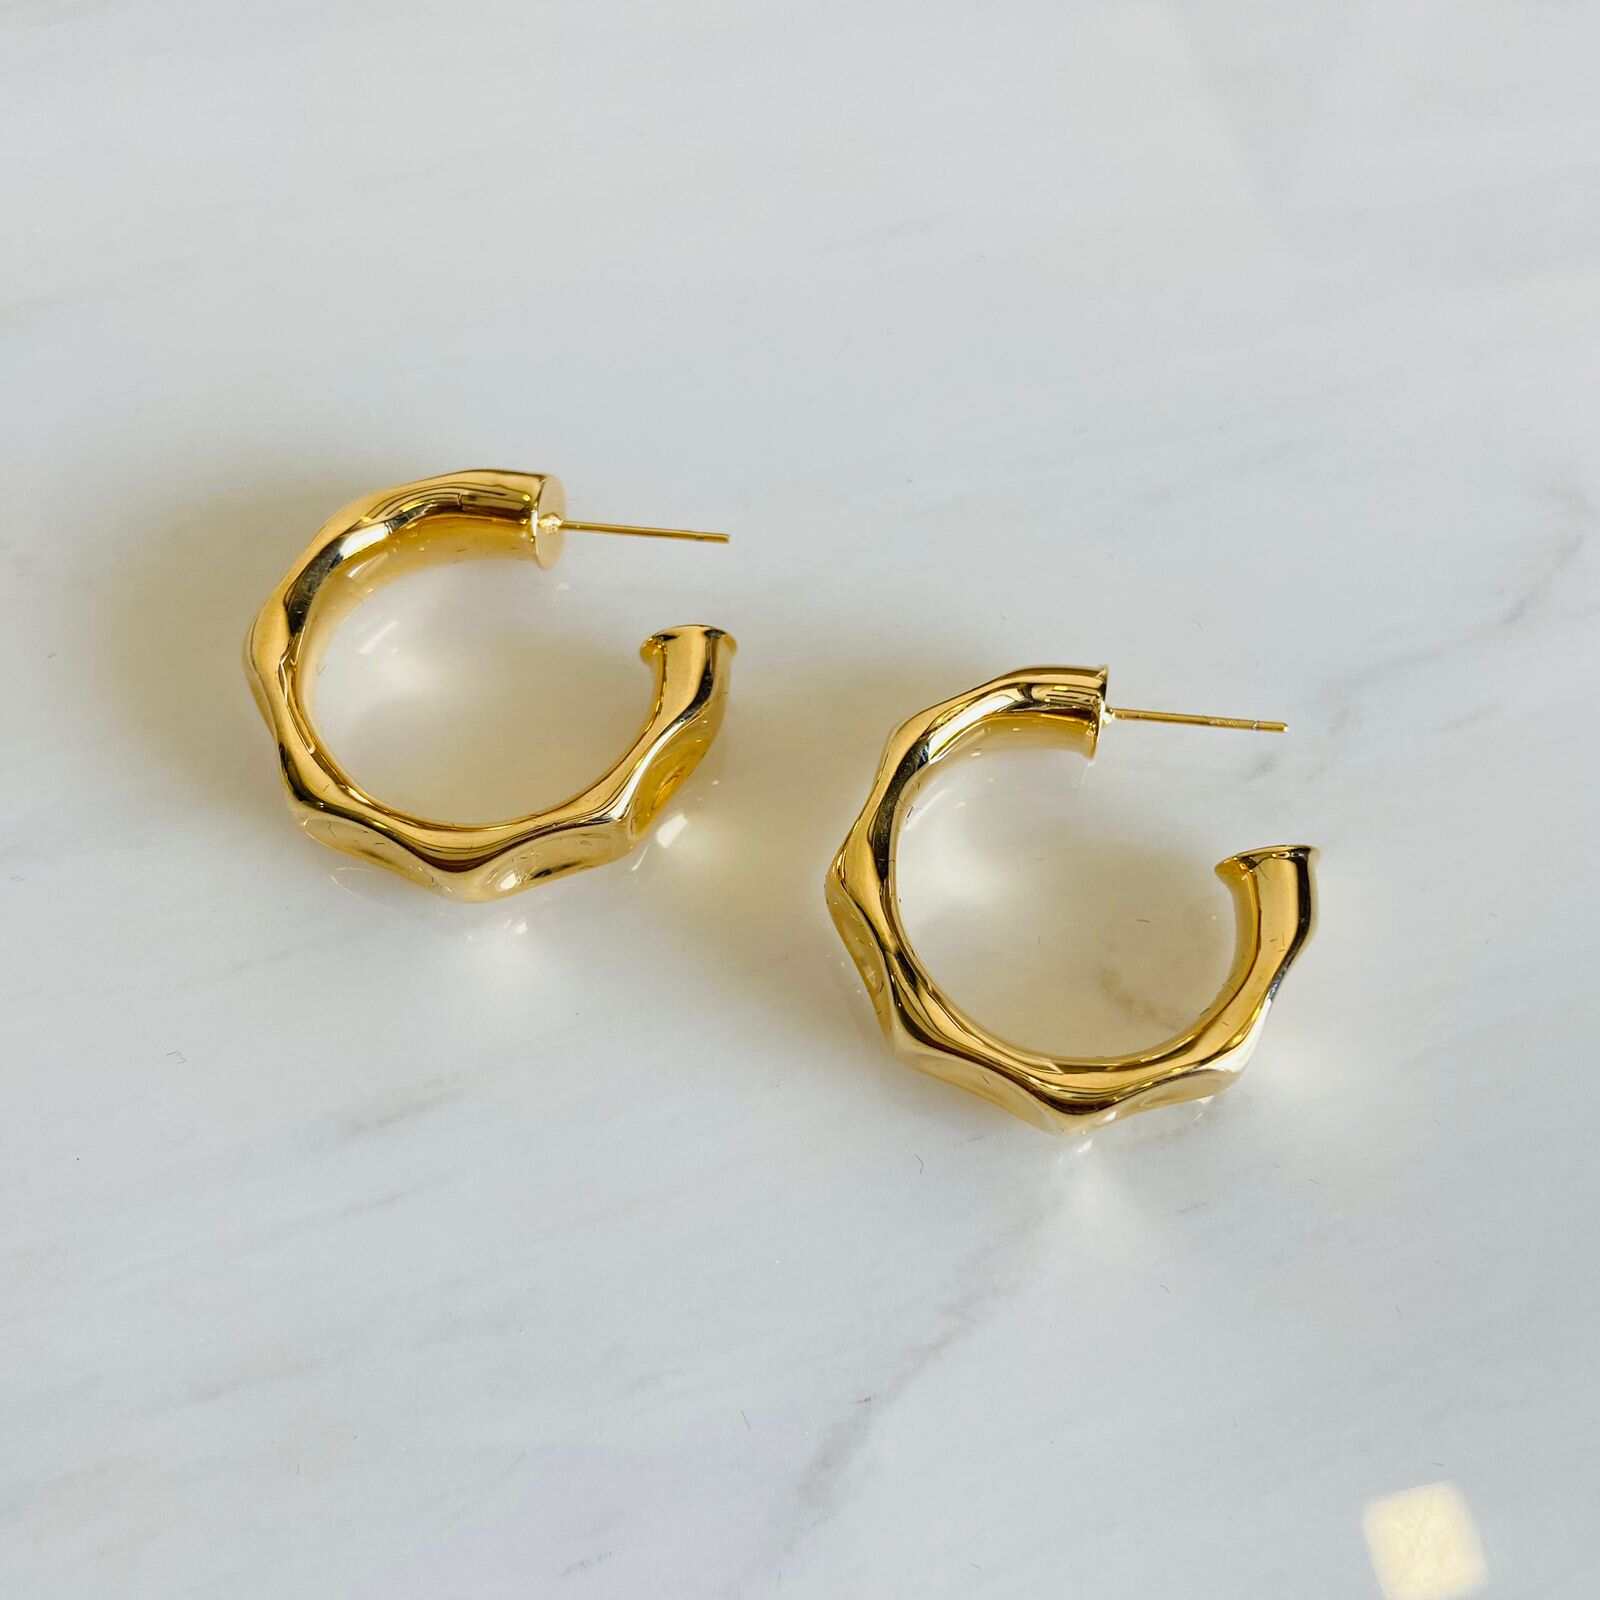 Gold Earrings Design Trends: What's Hot in 2023? - Market Business News